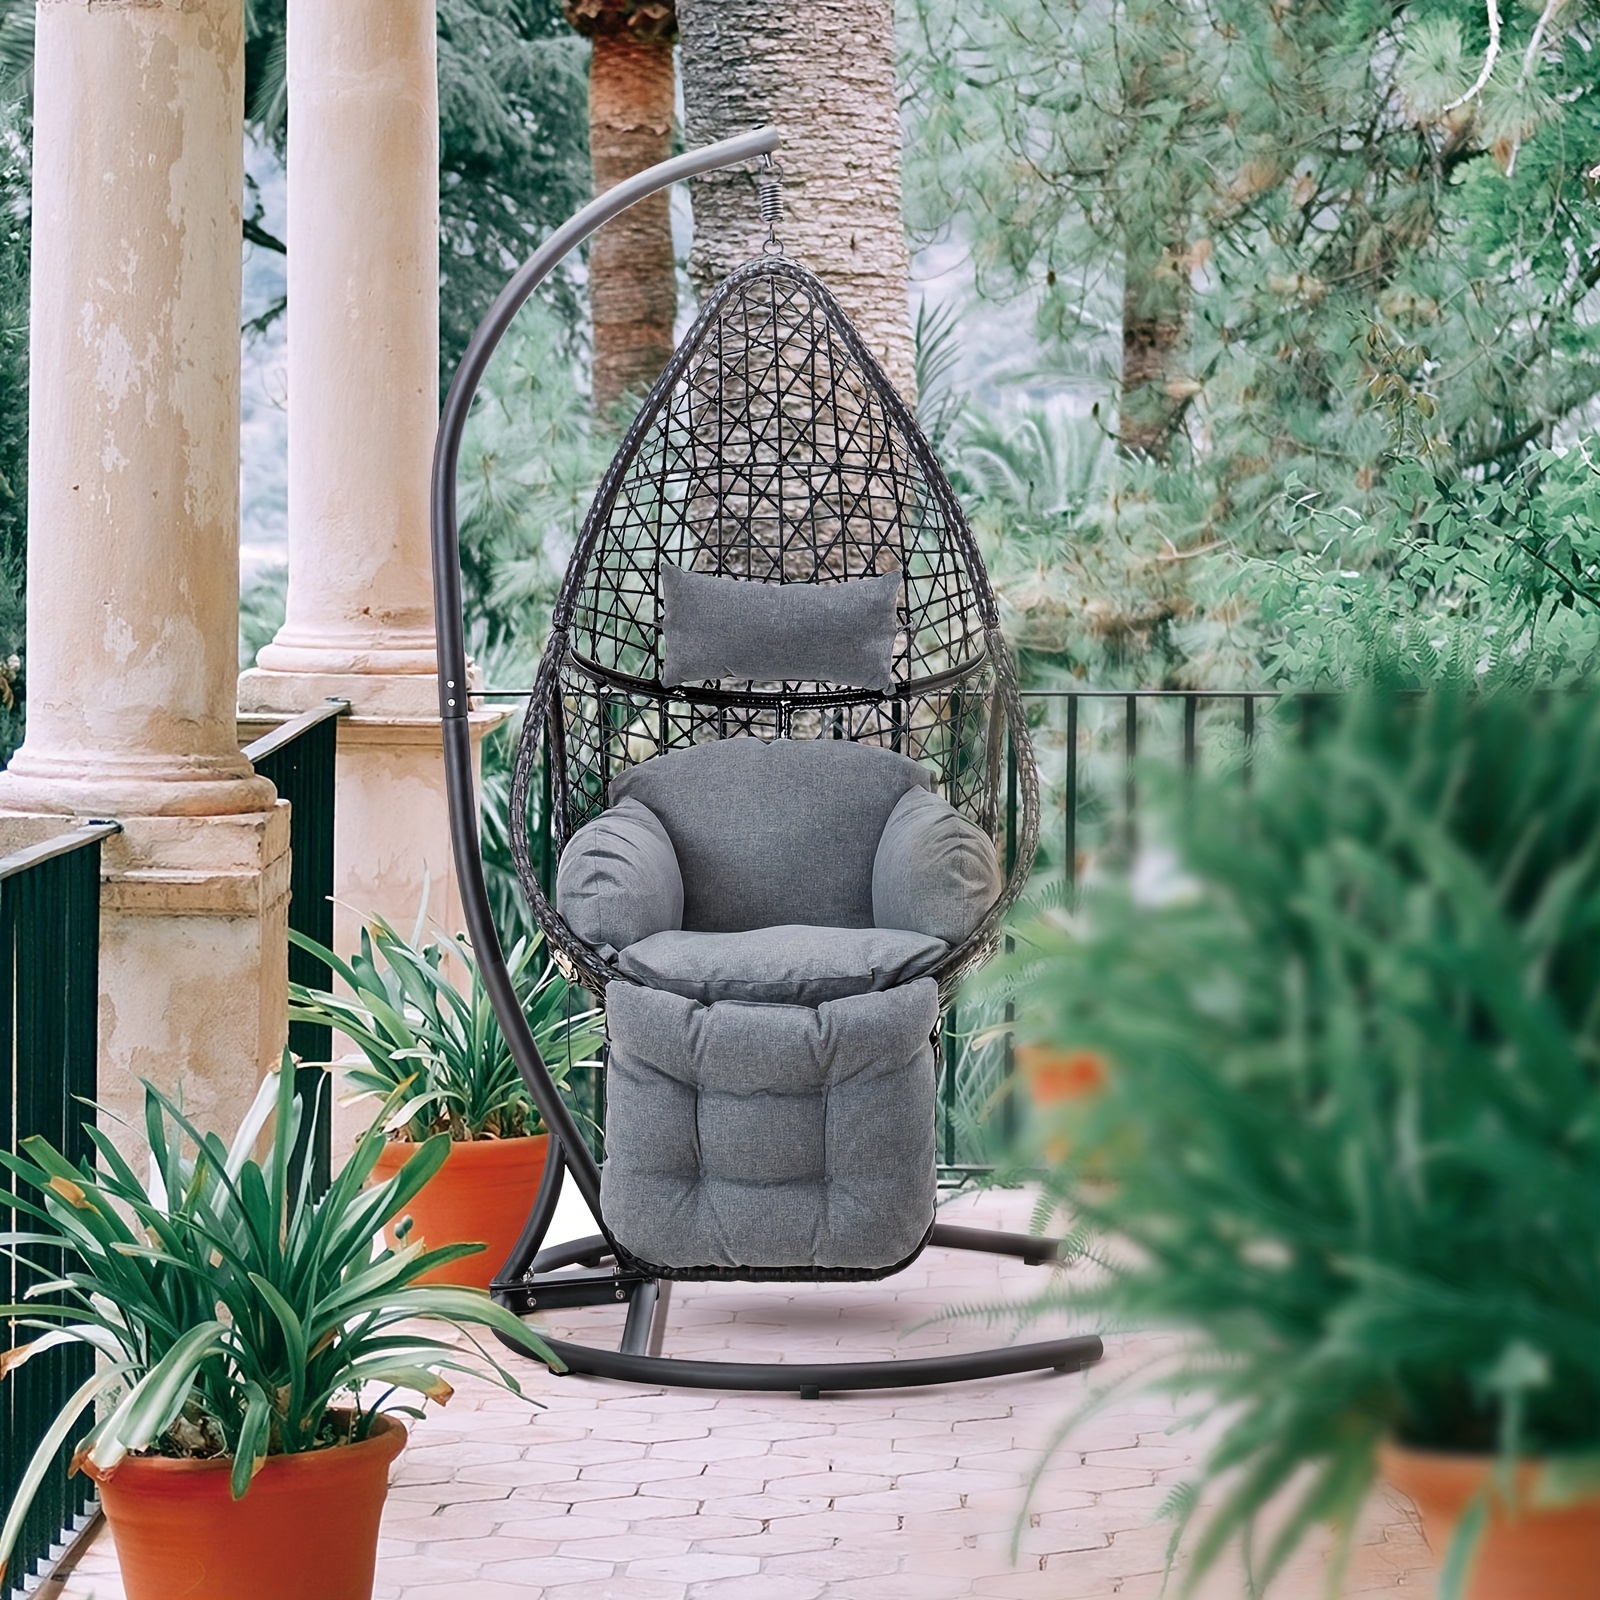 

Egg Chair With Stand & Leg Rest, Rattan Wicker Swing Chair Soft Thick Seat Cushion & Pillow, Patio Egg Chair With Heavy Duty Steel Frame, 400lb Capacity, For Outdoor & Indoor, Garden